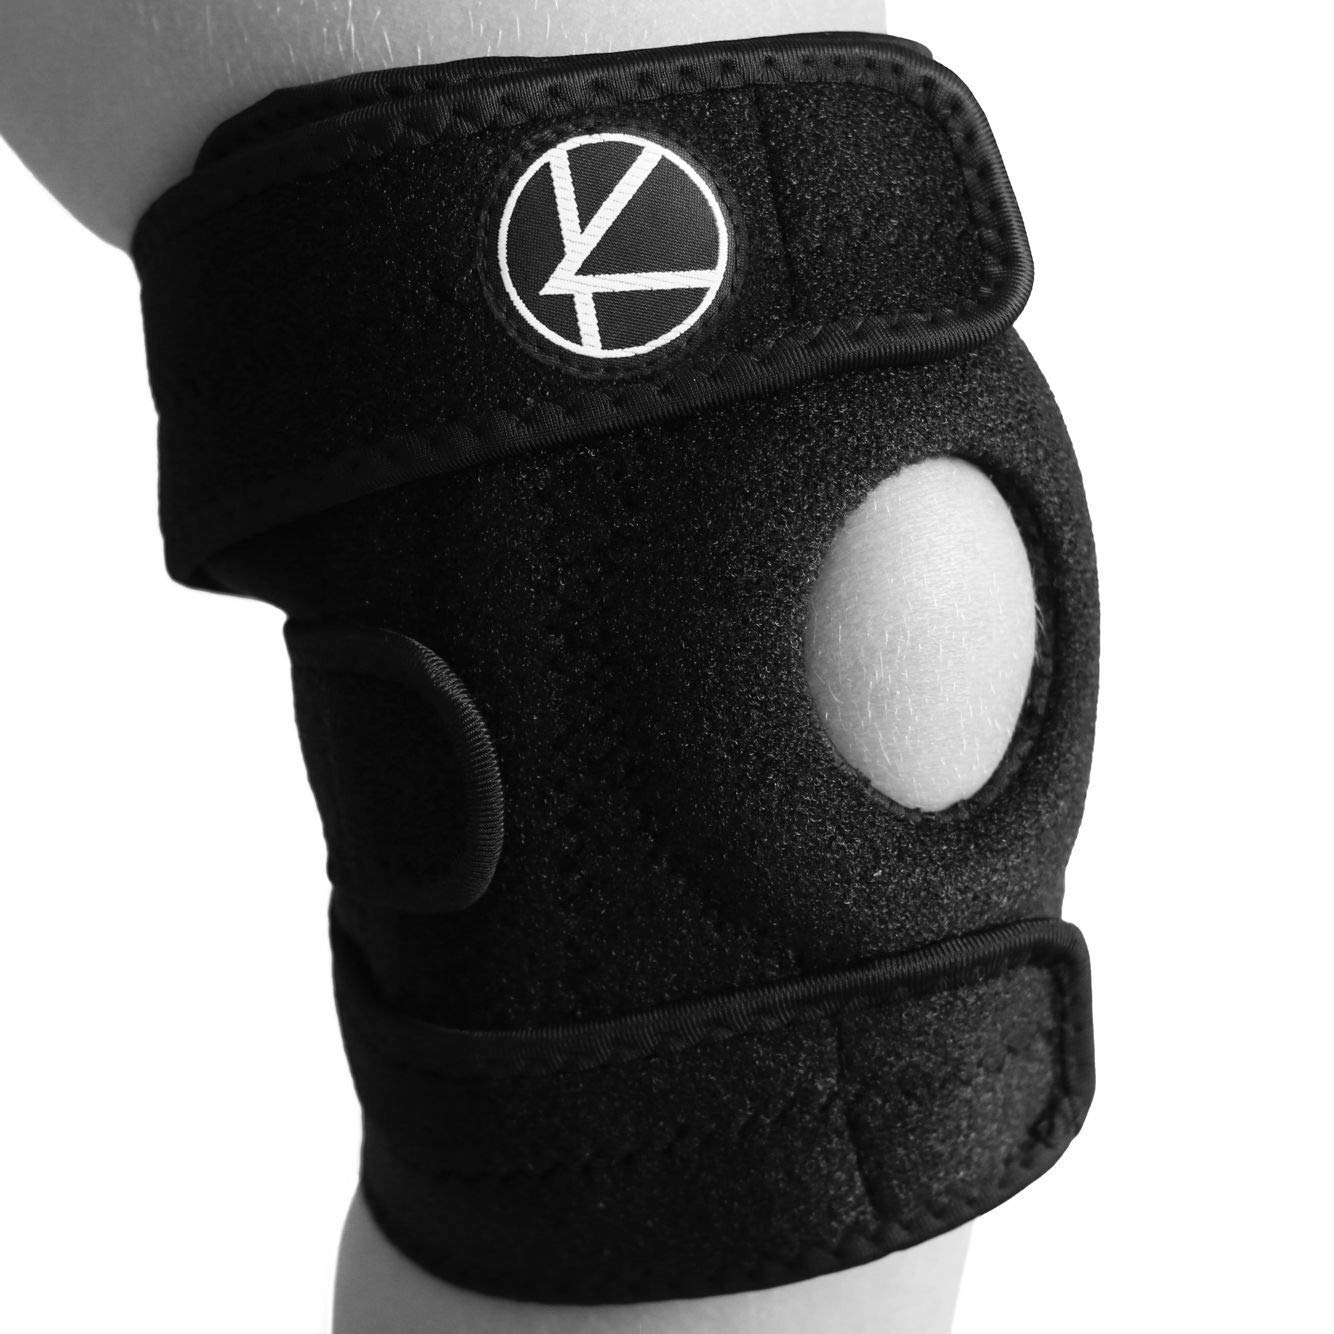 KARM Kids Knee Brace for Knee Pain Support - Knee Brace for Kids Osgood  Schlatter Knee Brace Youth, MCL, Sports, Meniscus Tear. Knee Support for  Kids. Child Knee Brace Support for Boys